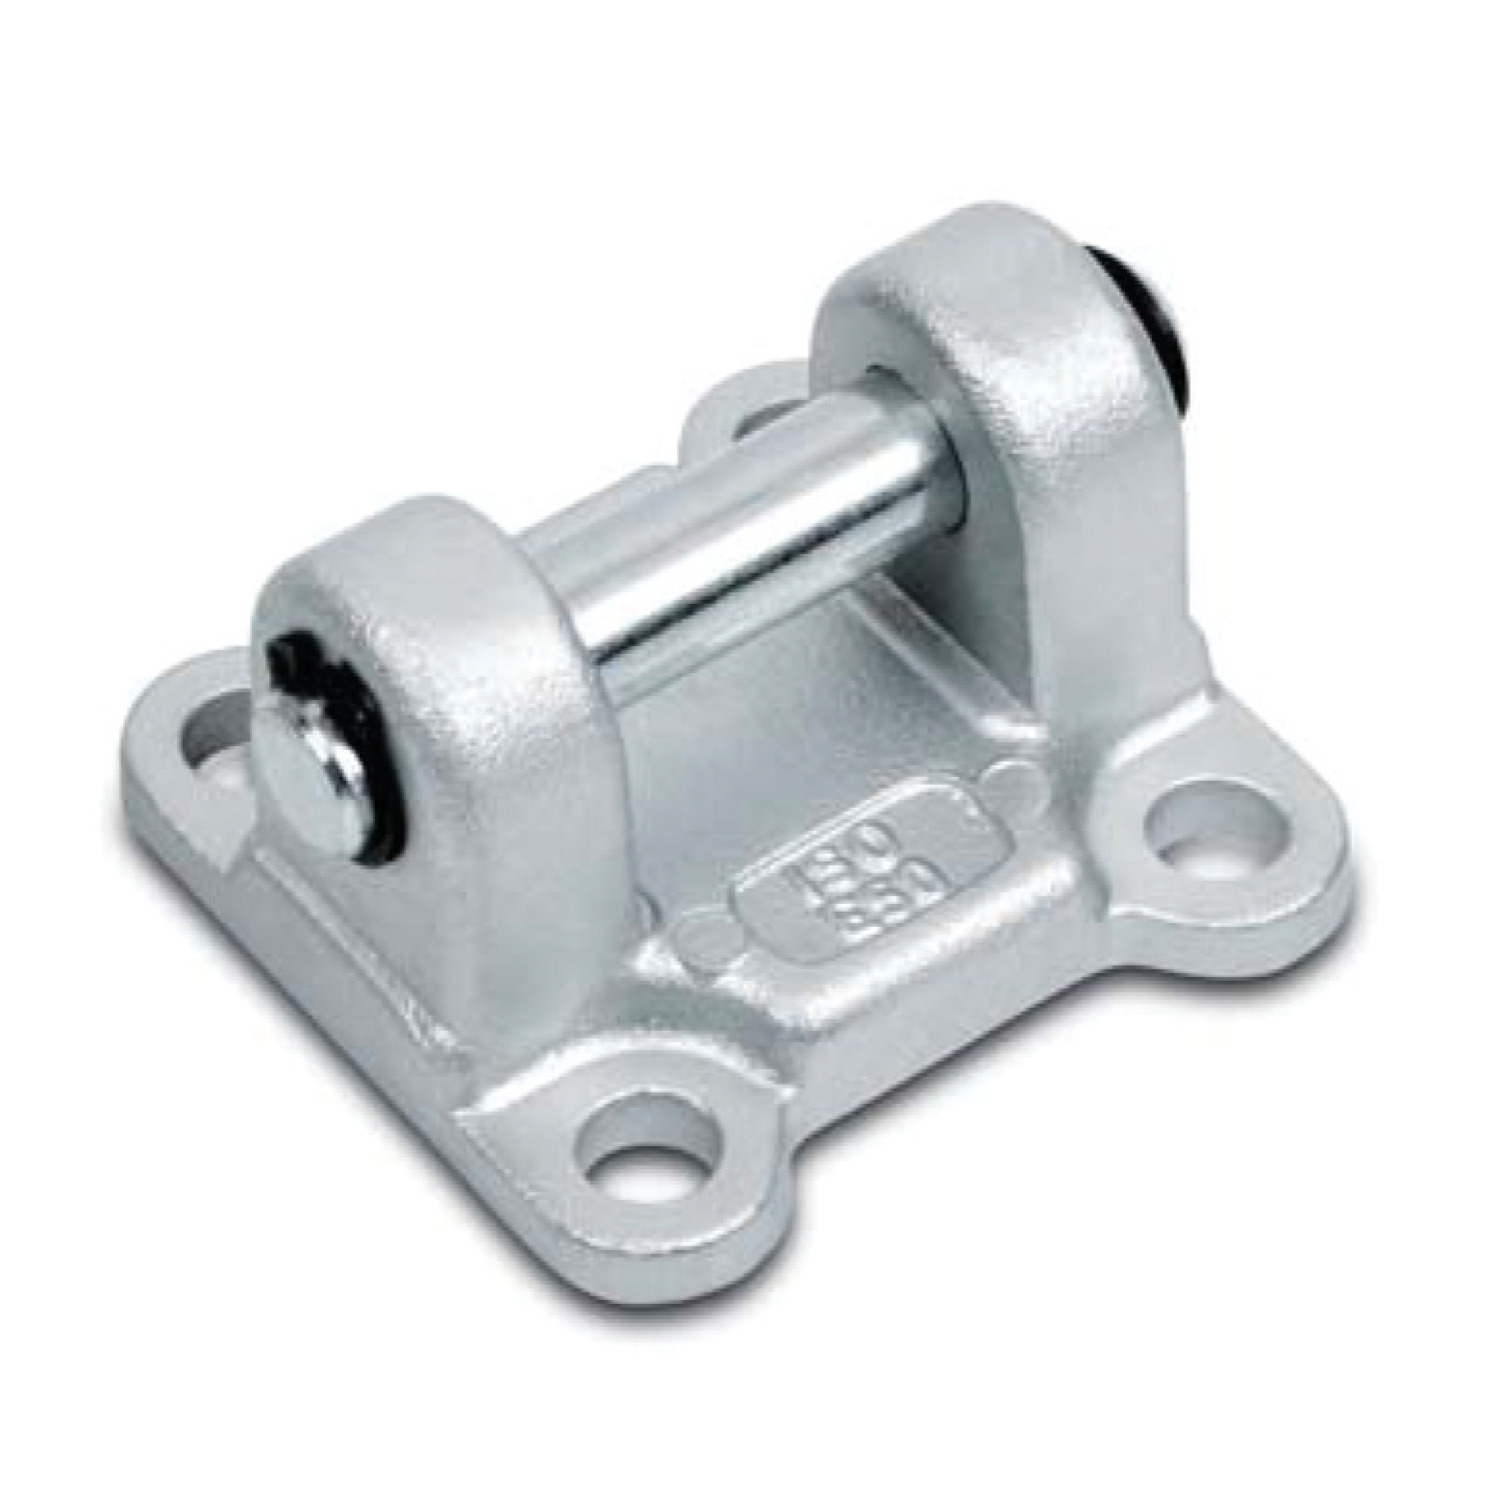 L4800 Air Cylinder Mounts - ISO Series